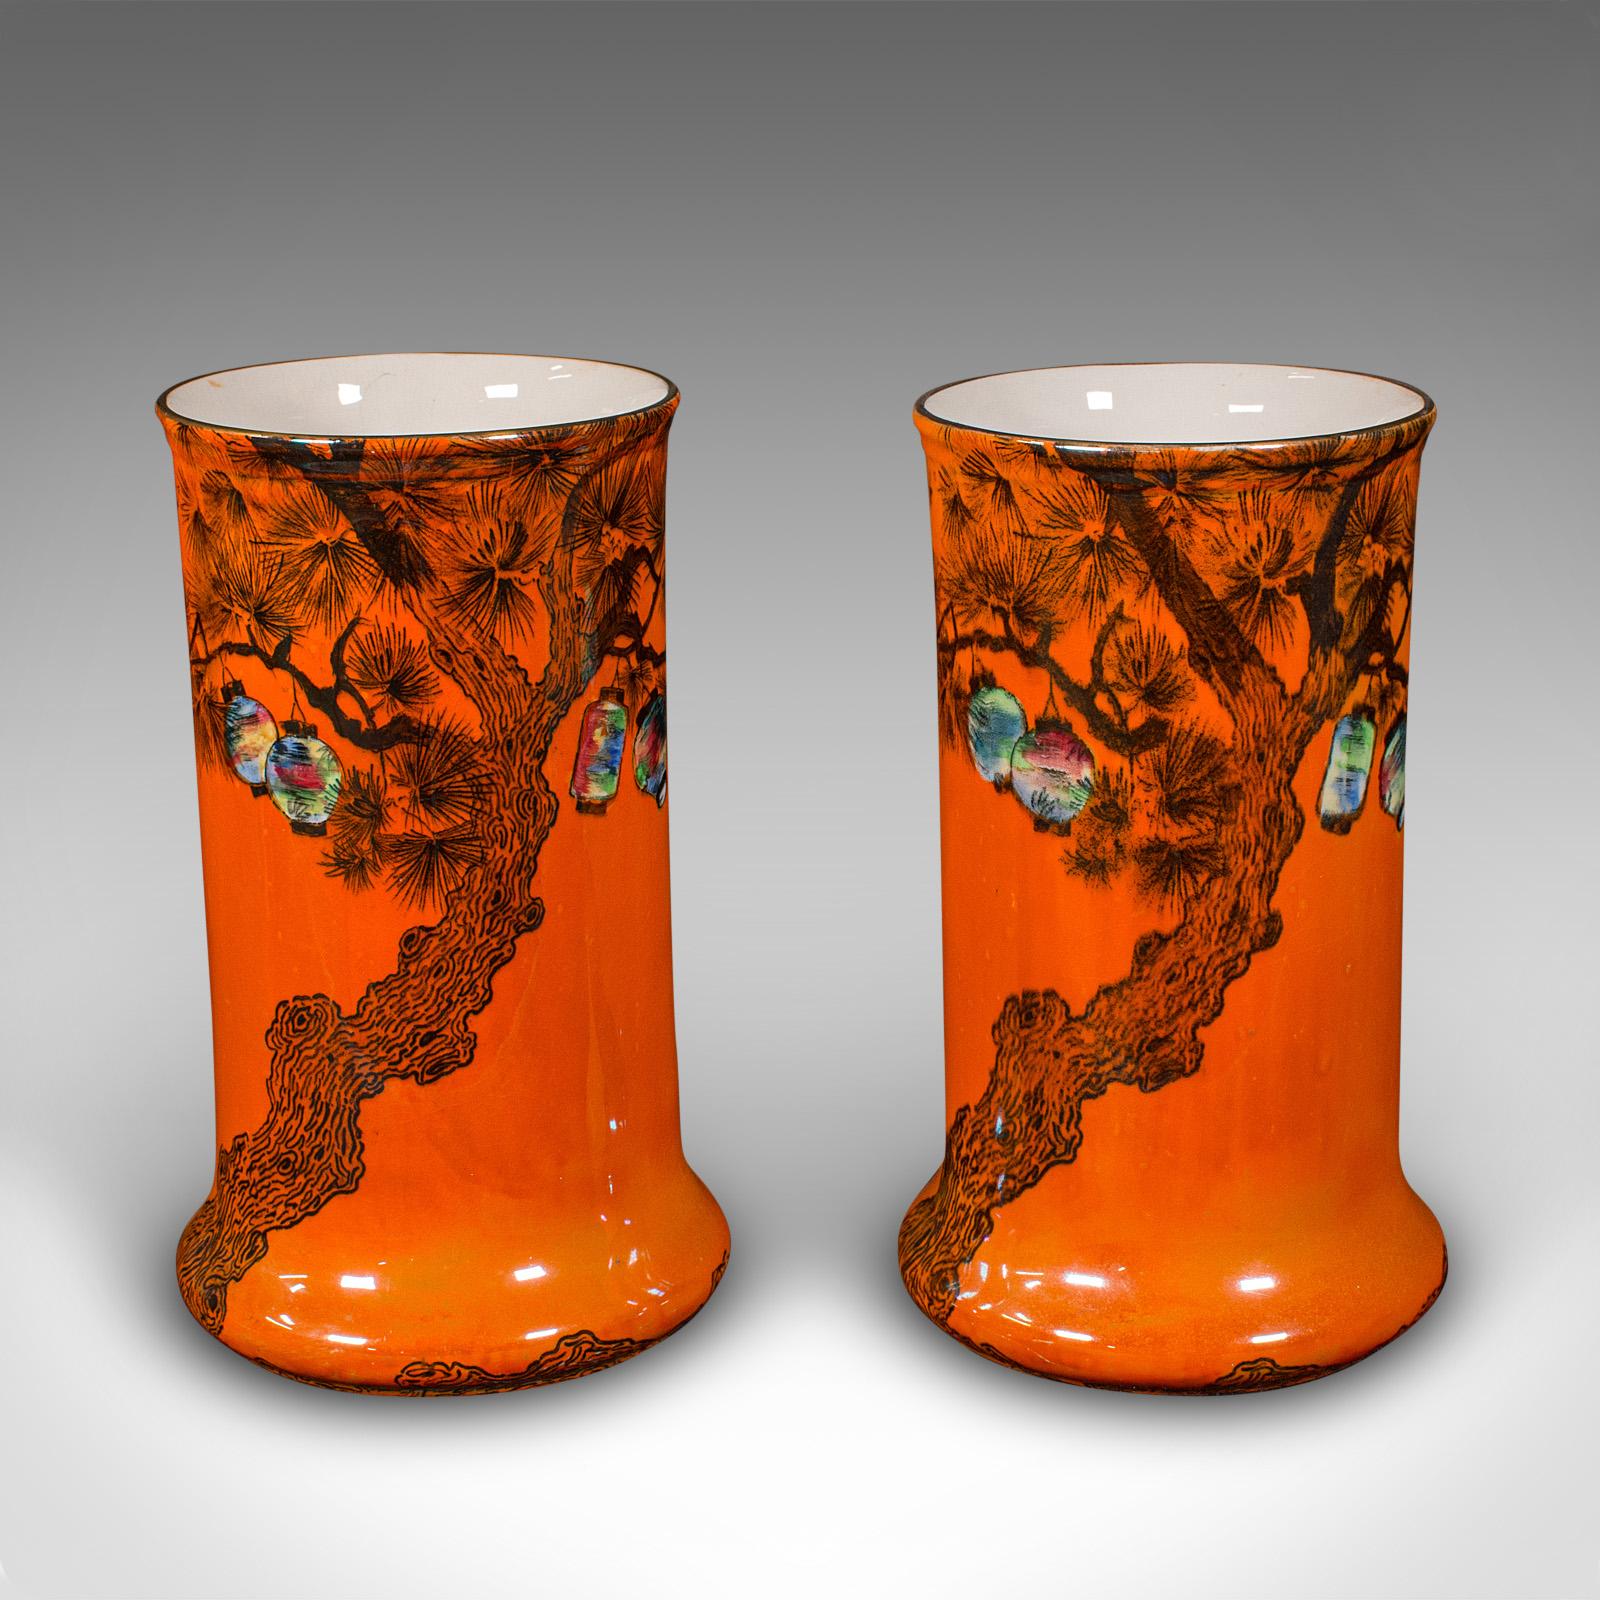 
This is a pair of antique flower vases. An English, lustre glaze ceramic sleeve with Oriental taste, dating to the early 20th century, circa 1920.

Dashing colour accentuated with an Oriental motif
Displaying a desirable aged patina and in good